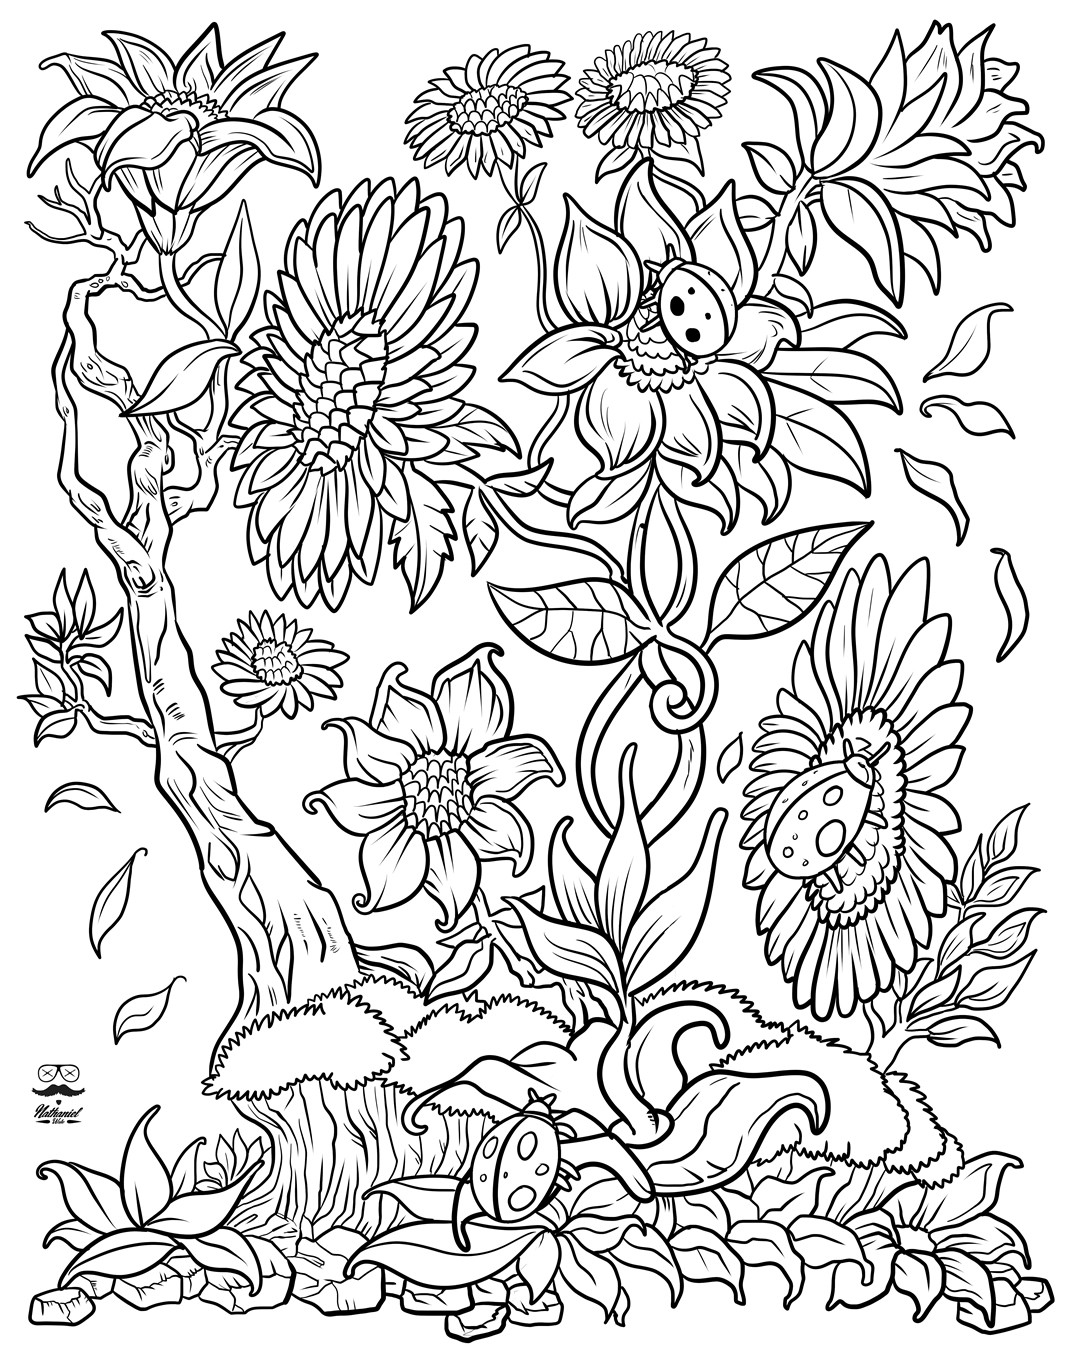 Flowers Coloring Pages For Adults
 Floral Fantasy Digital Version Adult Coloring Book